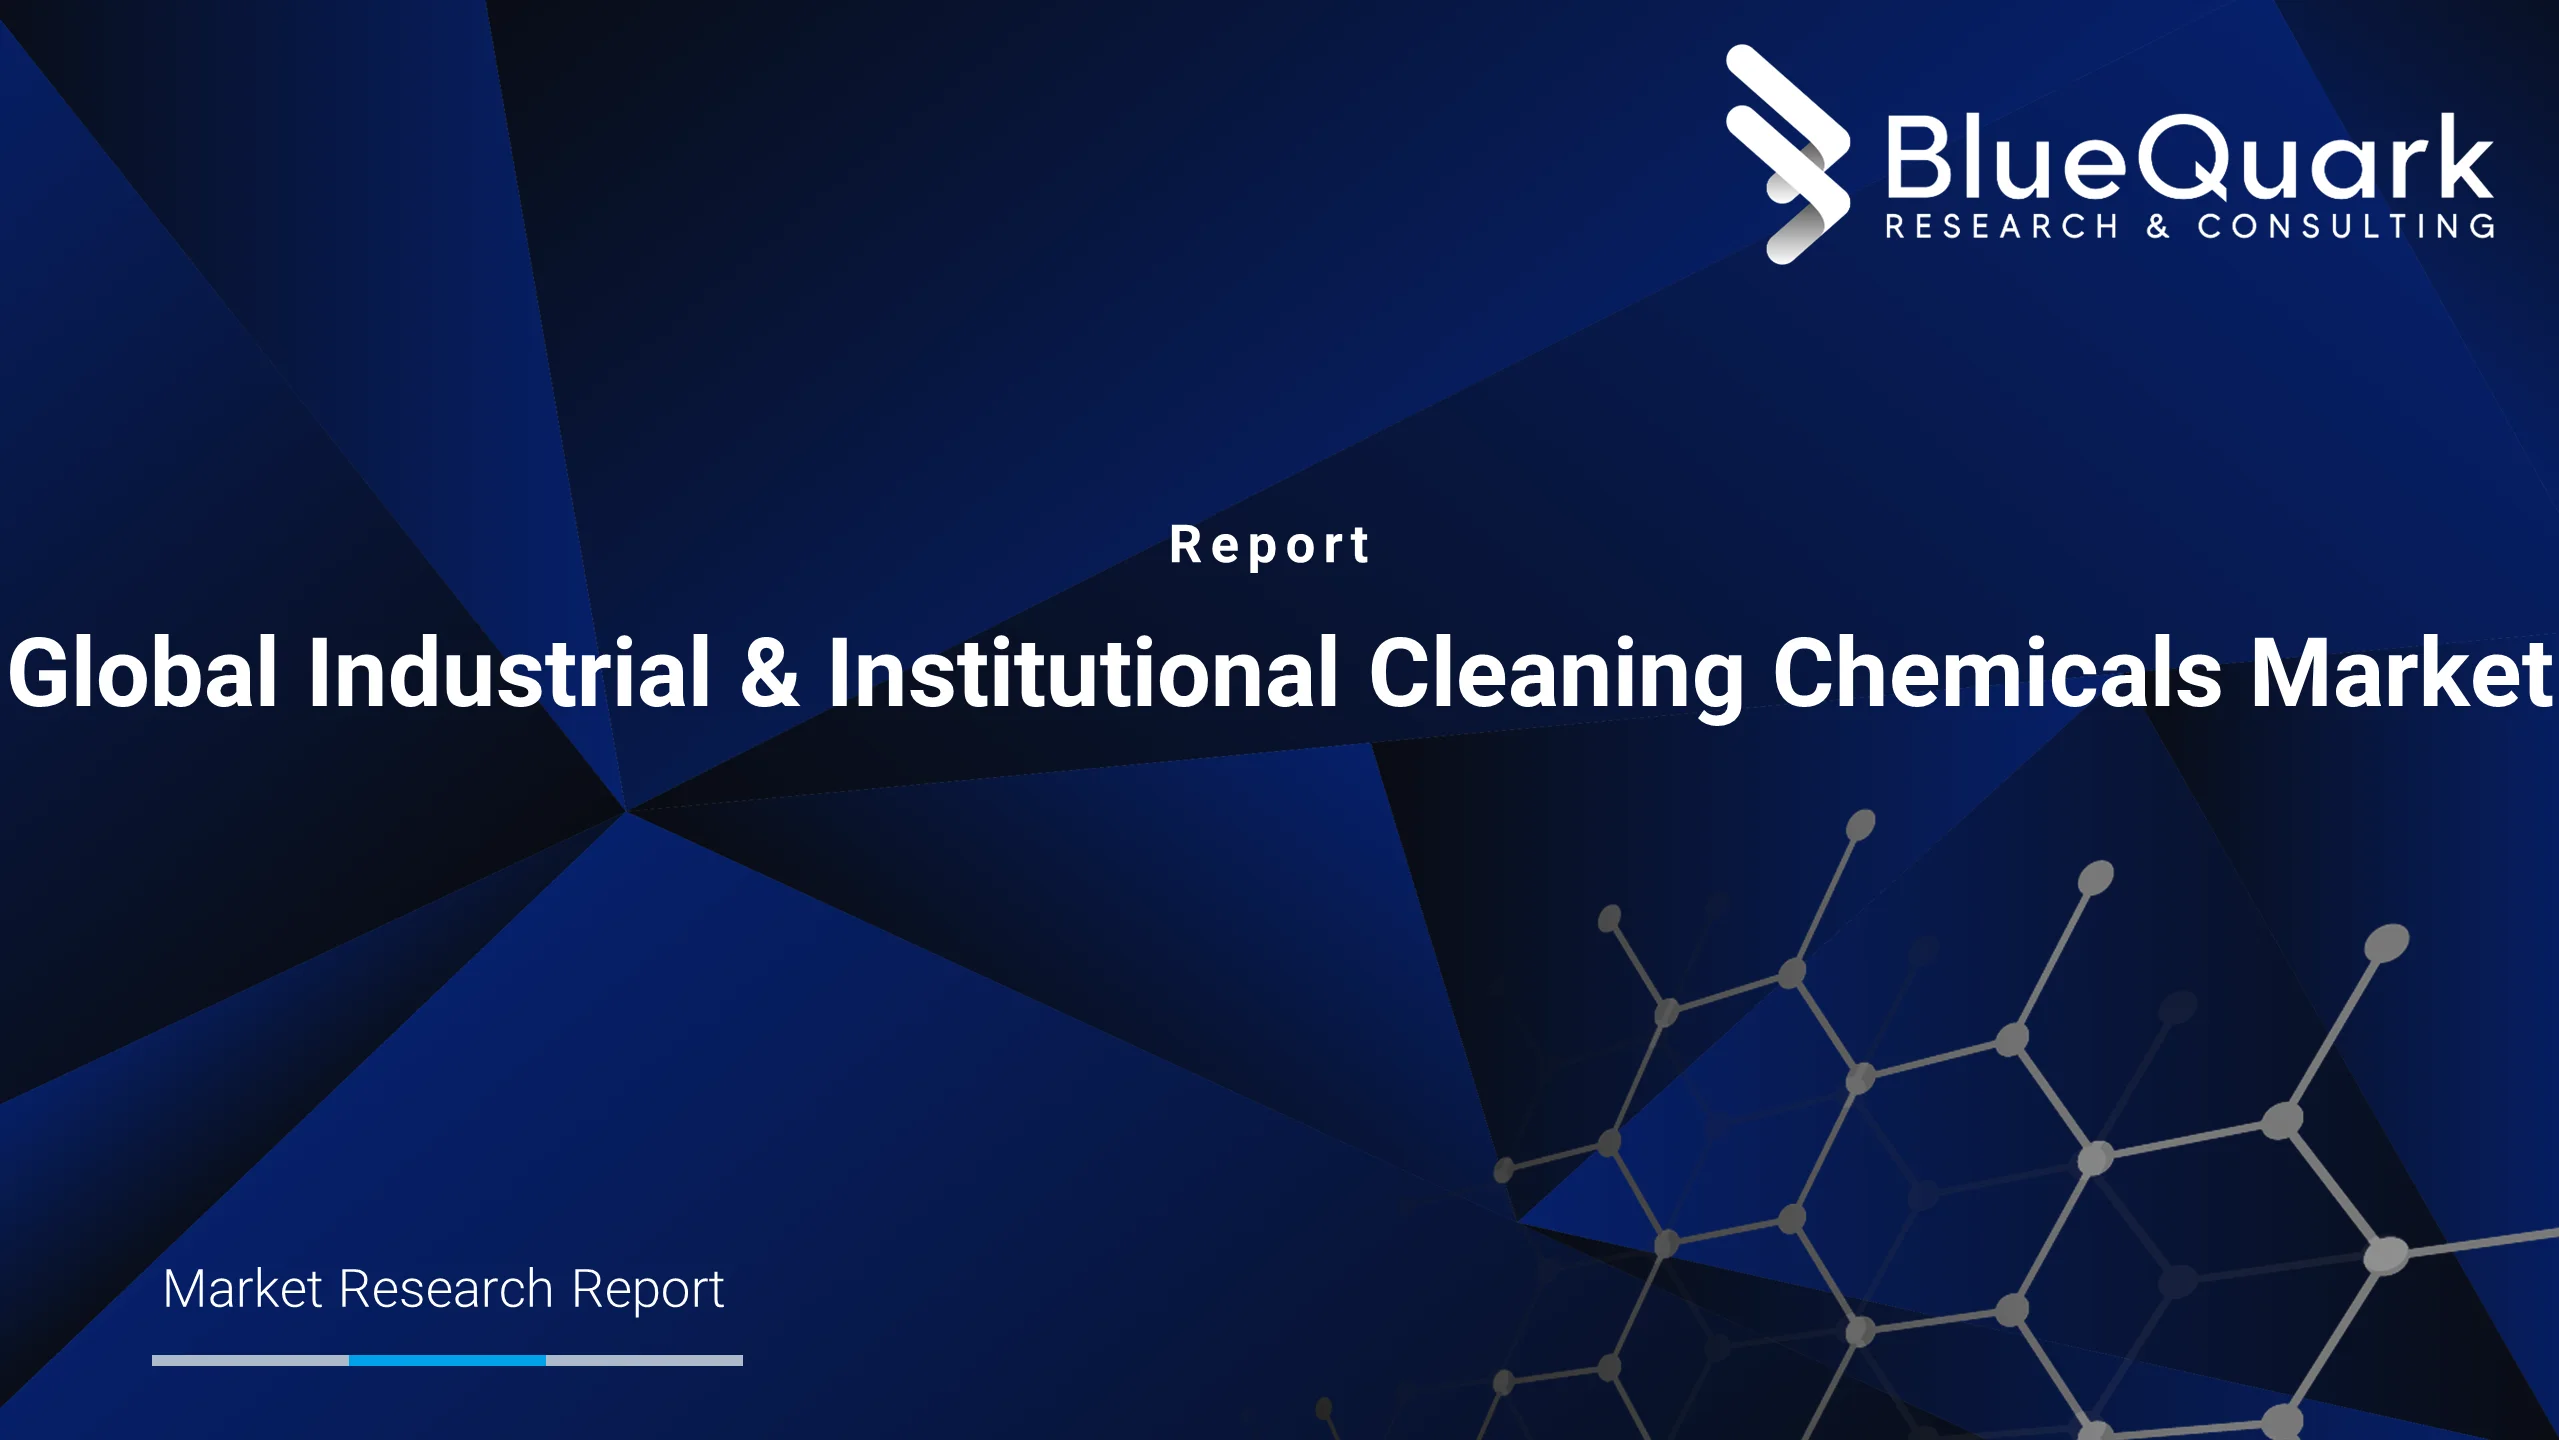 Global Industrial & Institutional Cleaning Chemicals Market Outlook to 2029